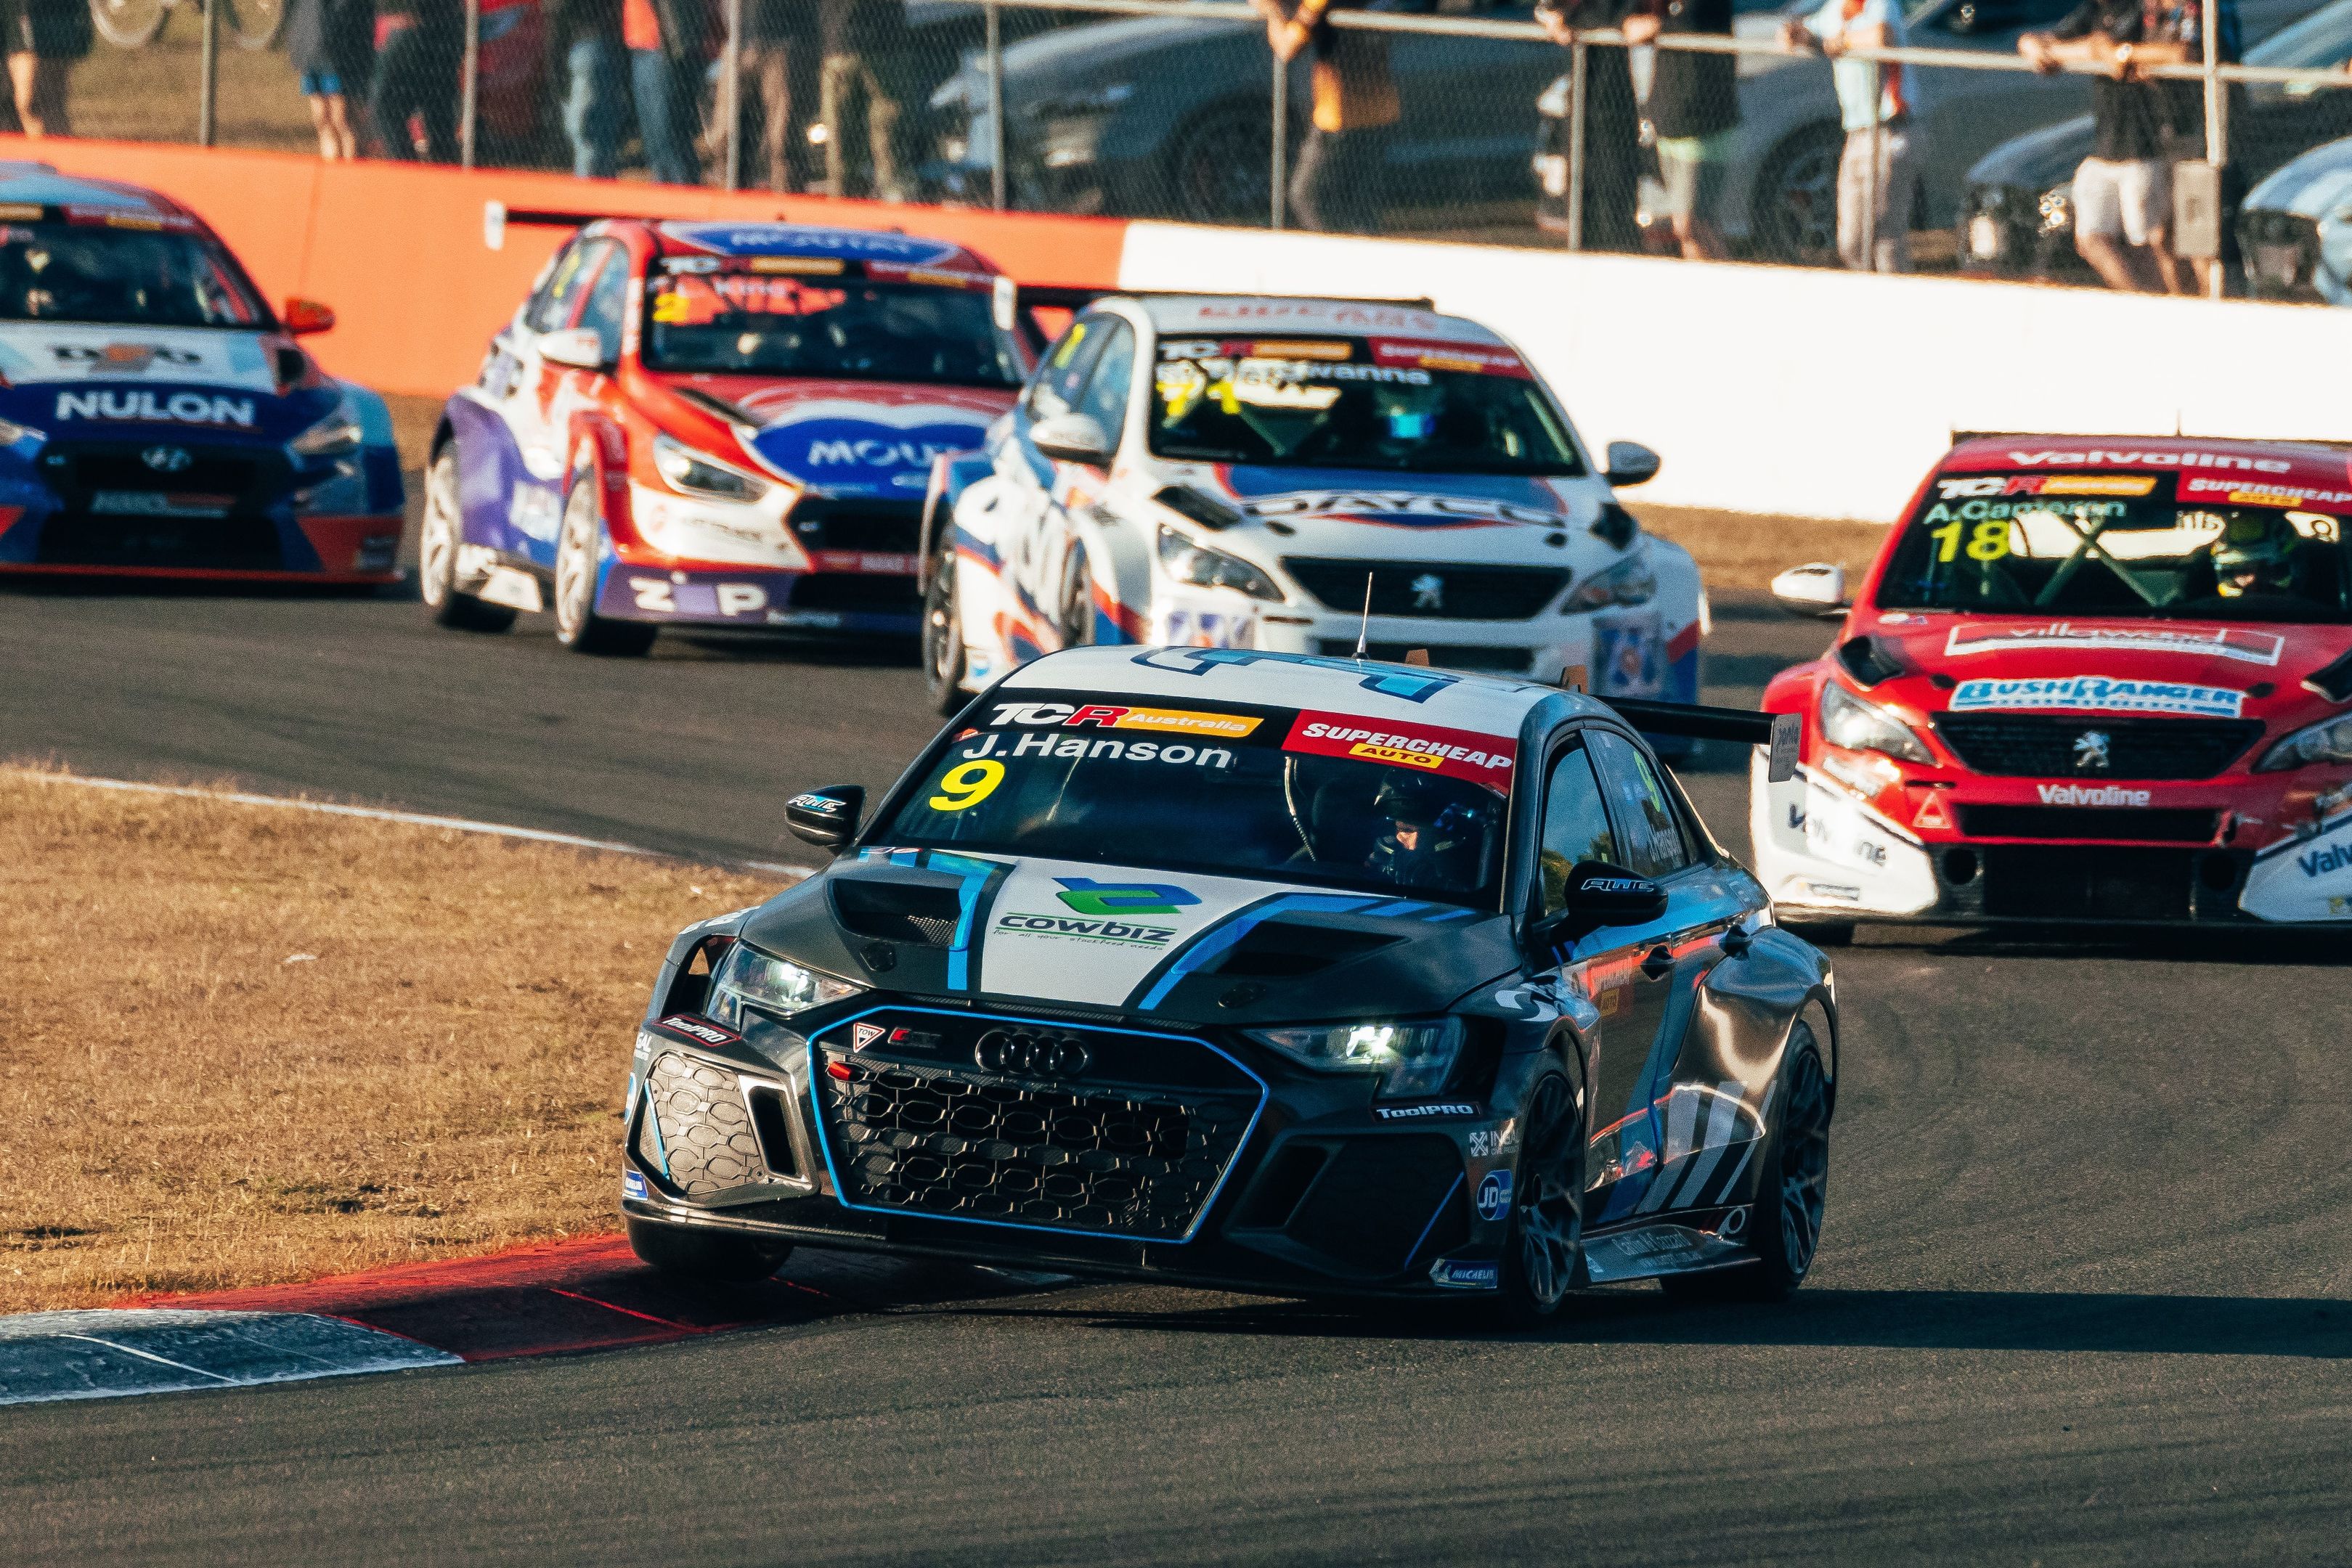 Cruel finish for Michael Caruso as teenager Jay Hanson snatches unlikely TCR win